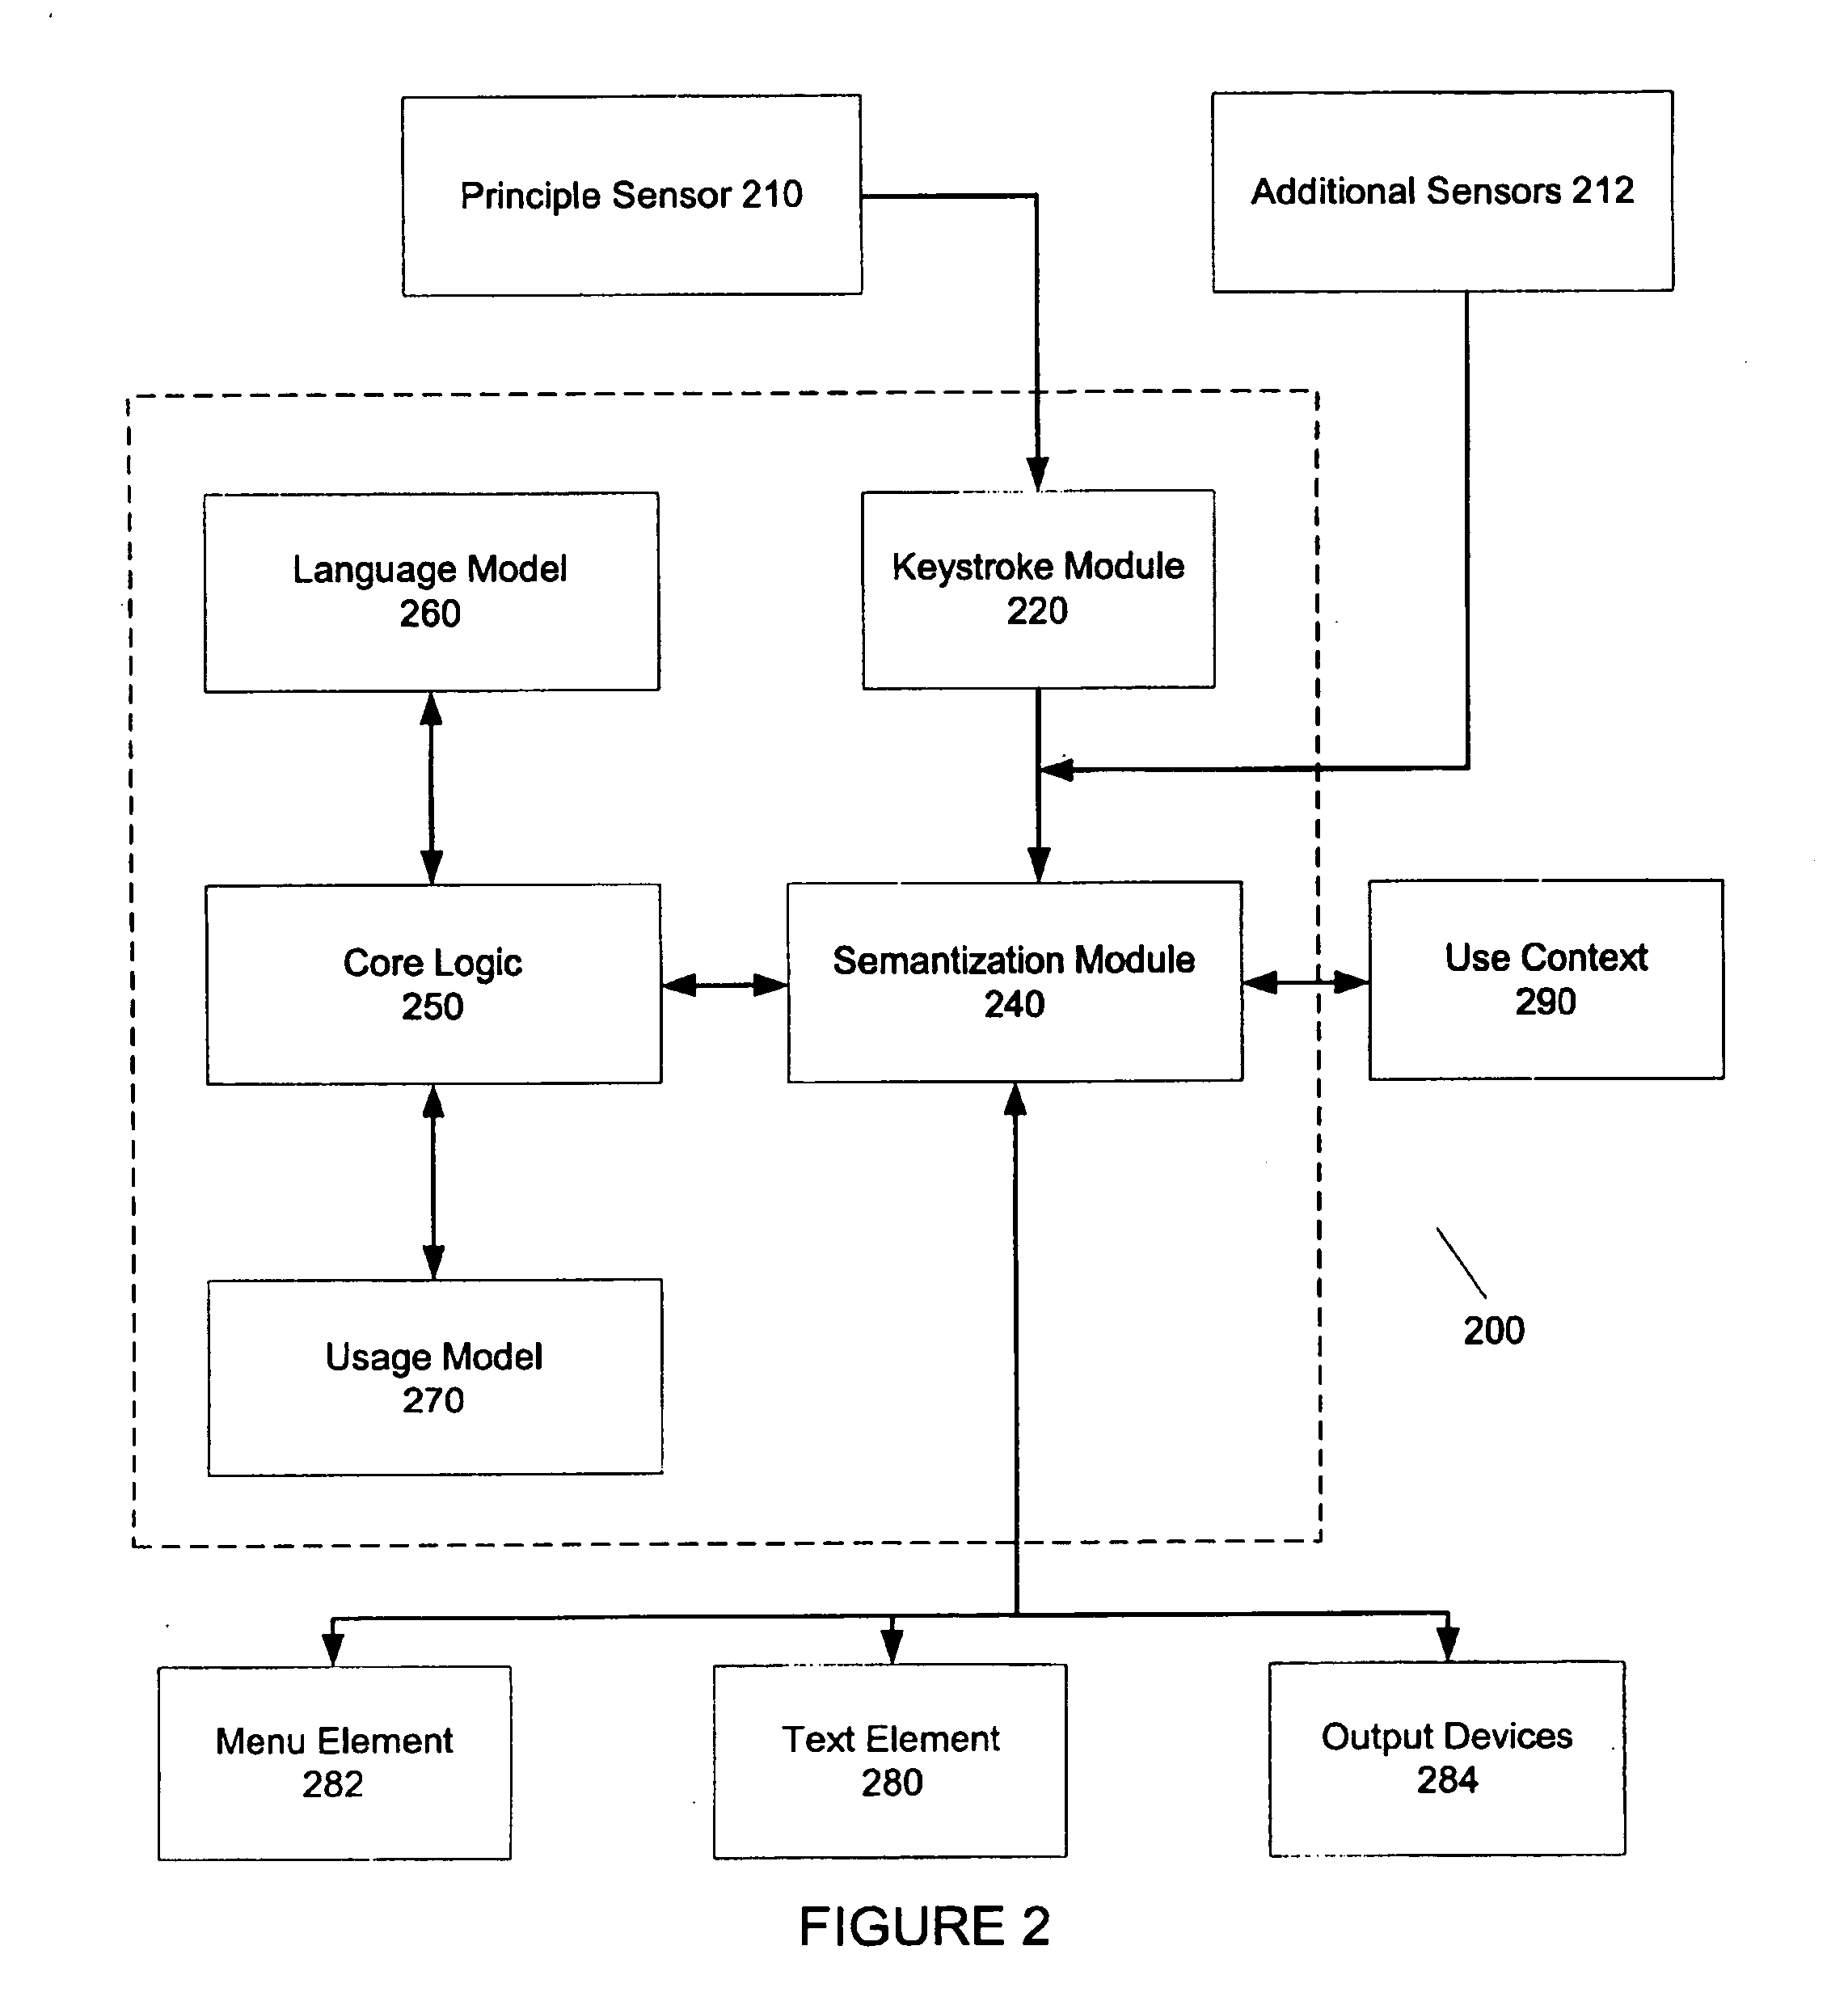 Apparatus method and system for a data entry interface